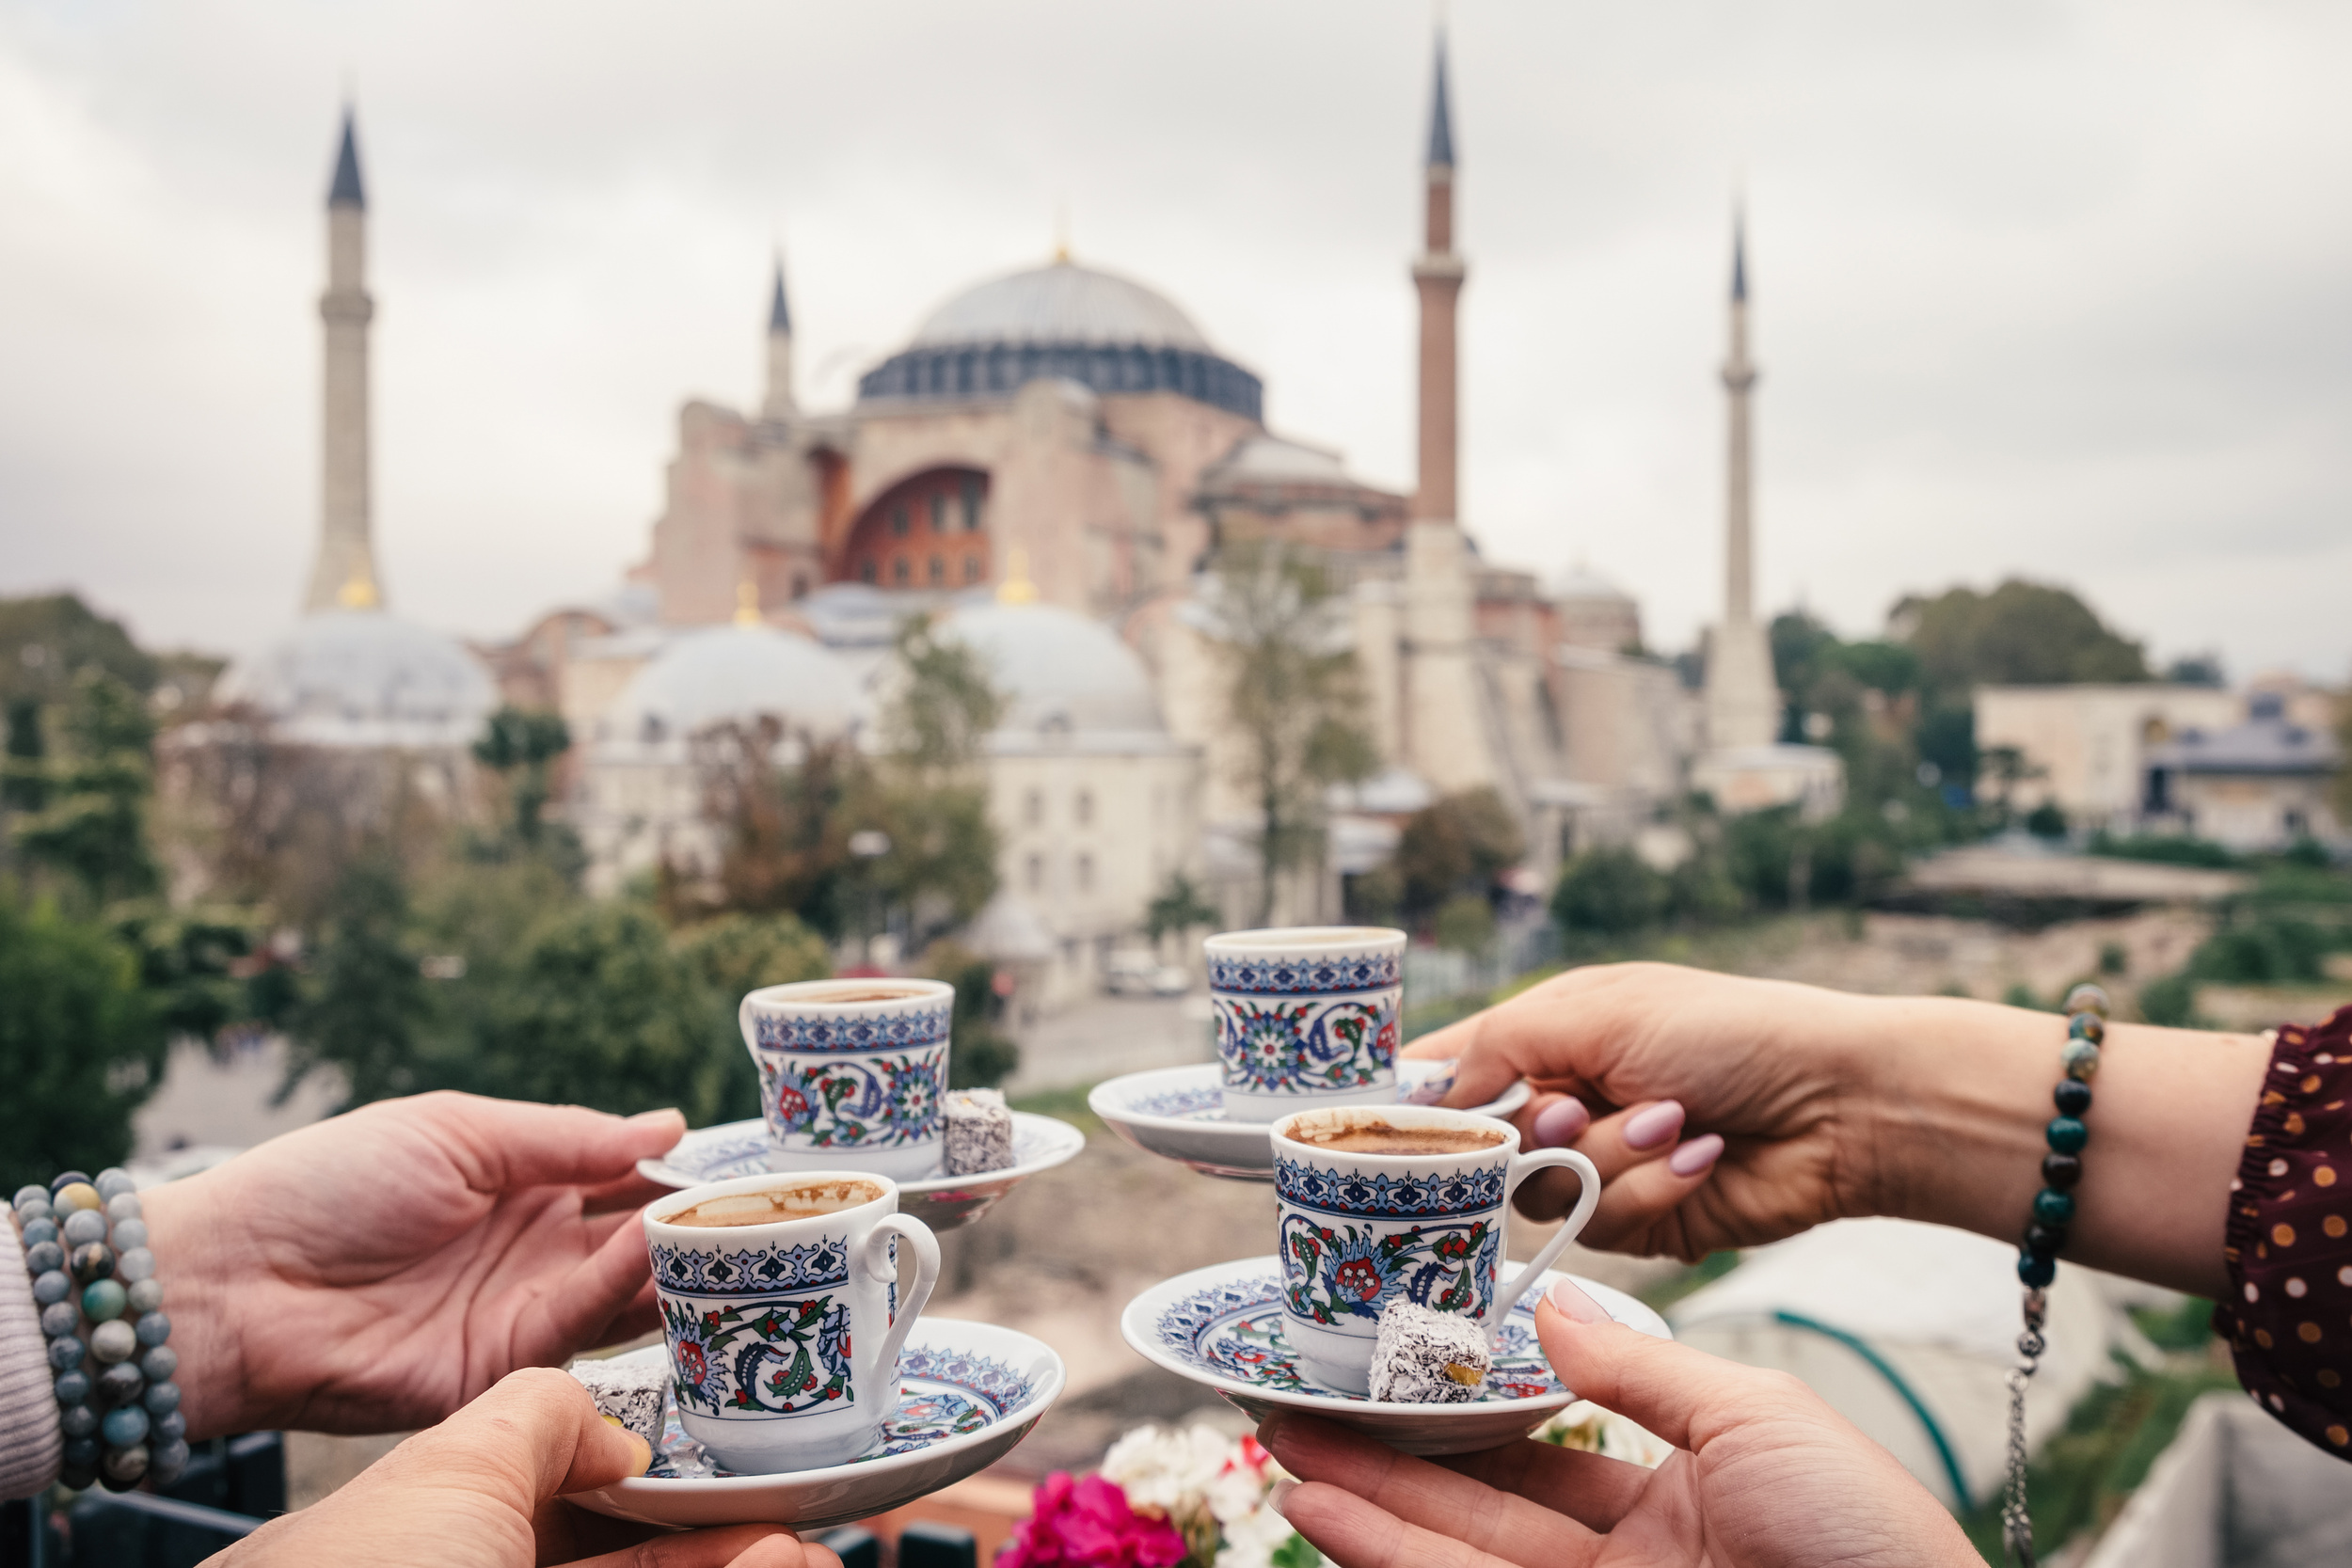 <p>Turkish coffee is an acquired taste, prepared in a cezve (a unique copper pot with a long handle) with finely ground beans slowly boiled. Sugar is usually added, so make sure to say if you prefer your cup without it. But if you love it, you’ll really enjoy sampling it all over Turkey. </p><p>You may also like: <a href='https://www.yardbarker.com/lifestyle/articles/cold_as_ice_20_foods_that_freeze_the_best_121523/s1__34465163'>Cold as ice: 20 foods that freeze the best</a></p>